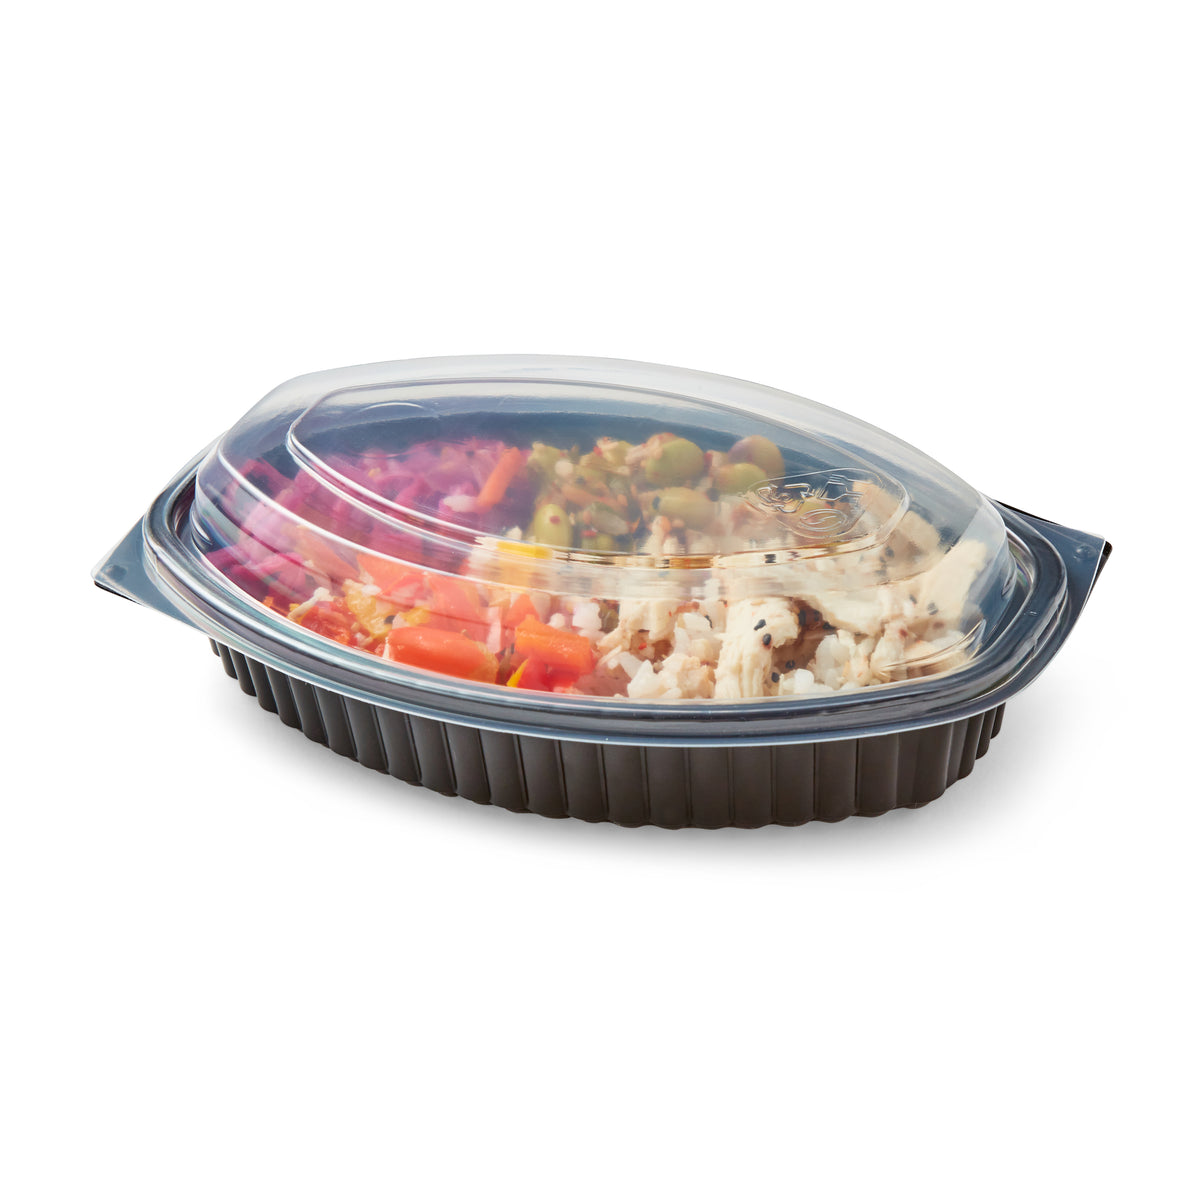 10 x 520 ml (18.3 ounce) Microwavable Meal Prep Hot Food Containers & Lids (207mm x 143mm x 59mm)